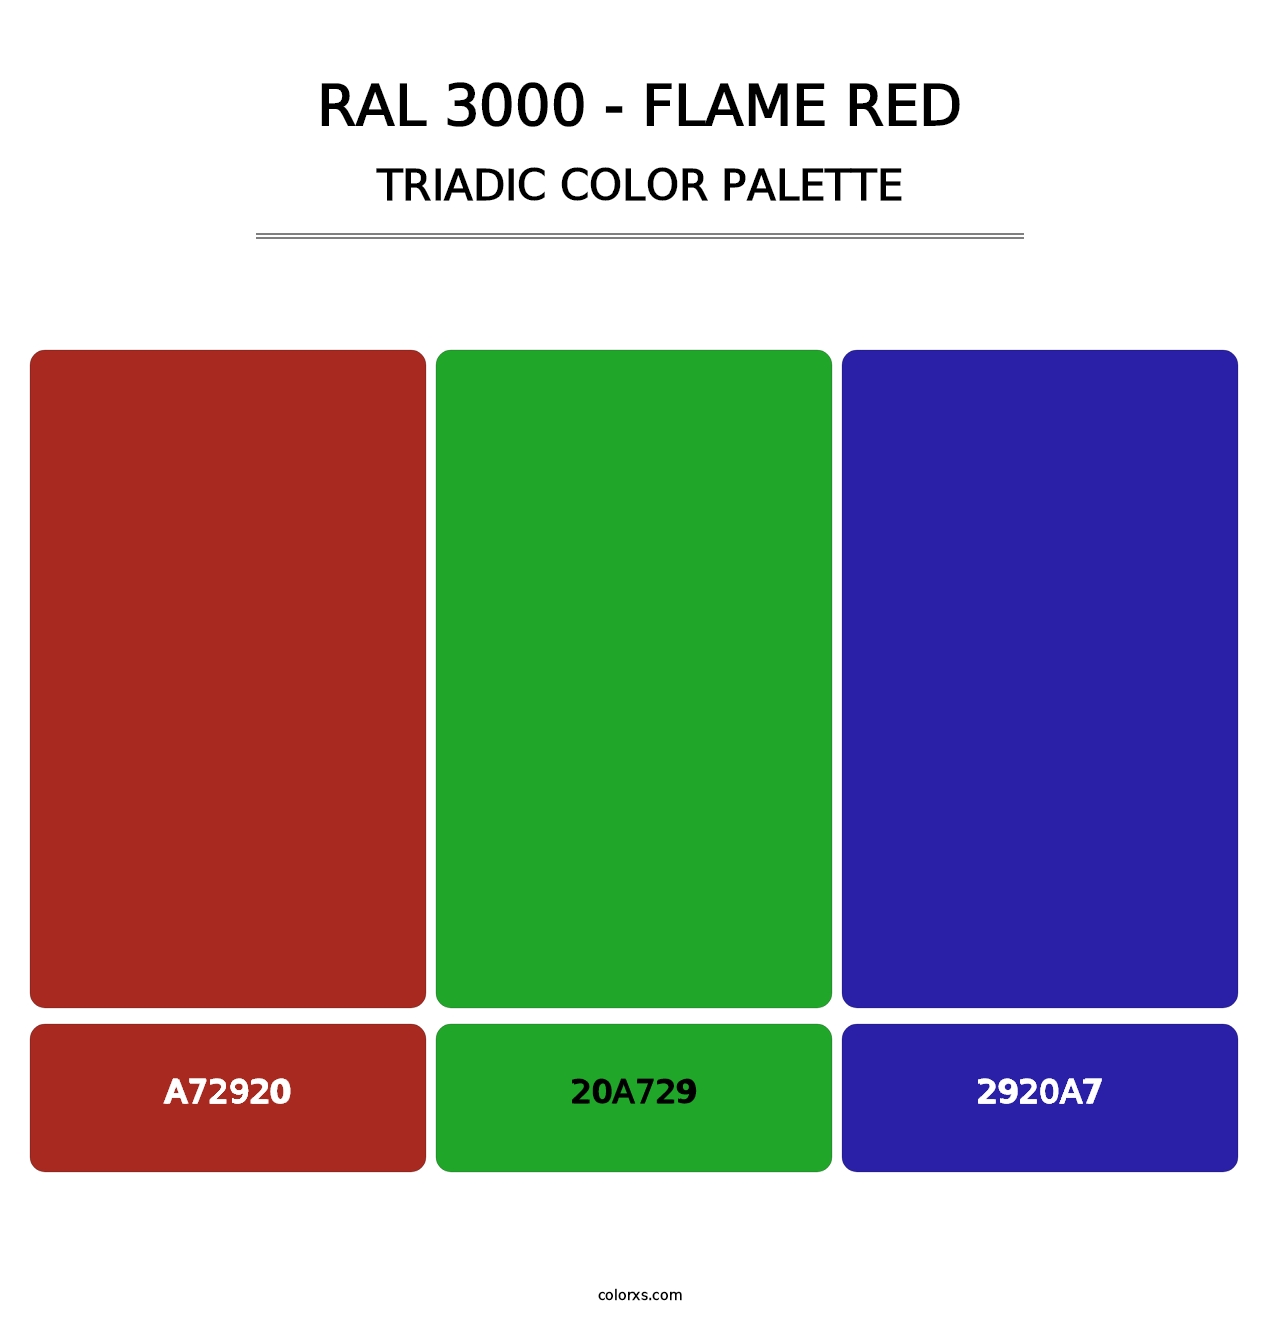 RAL 3000 - Flame Red - Triadic Color Palette